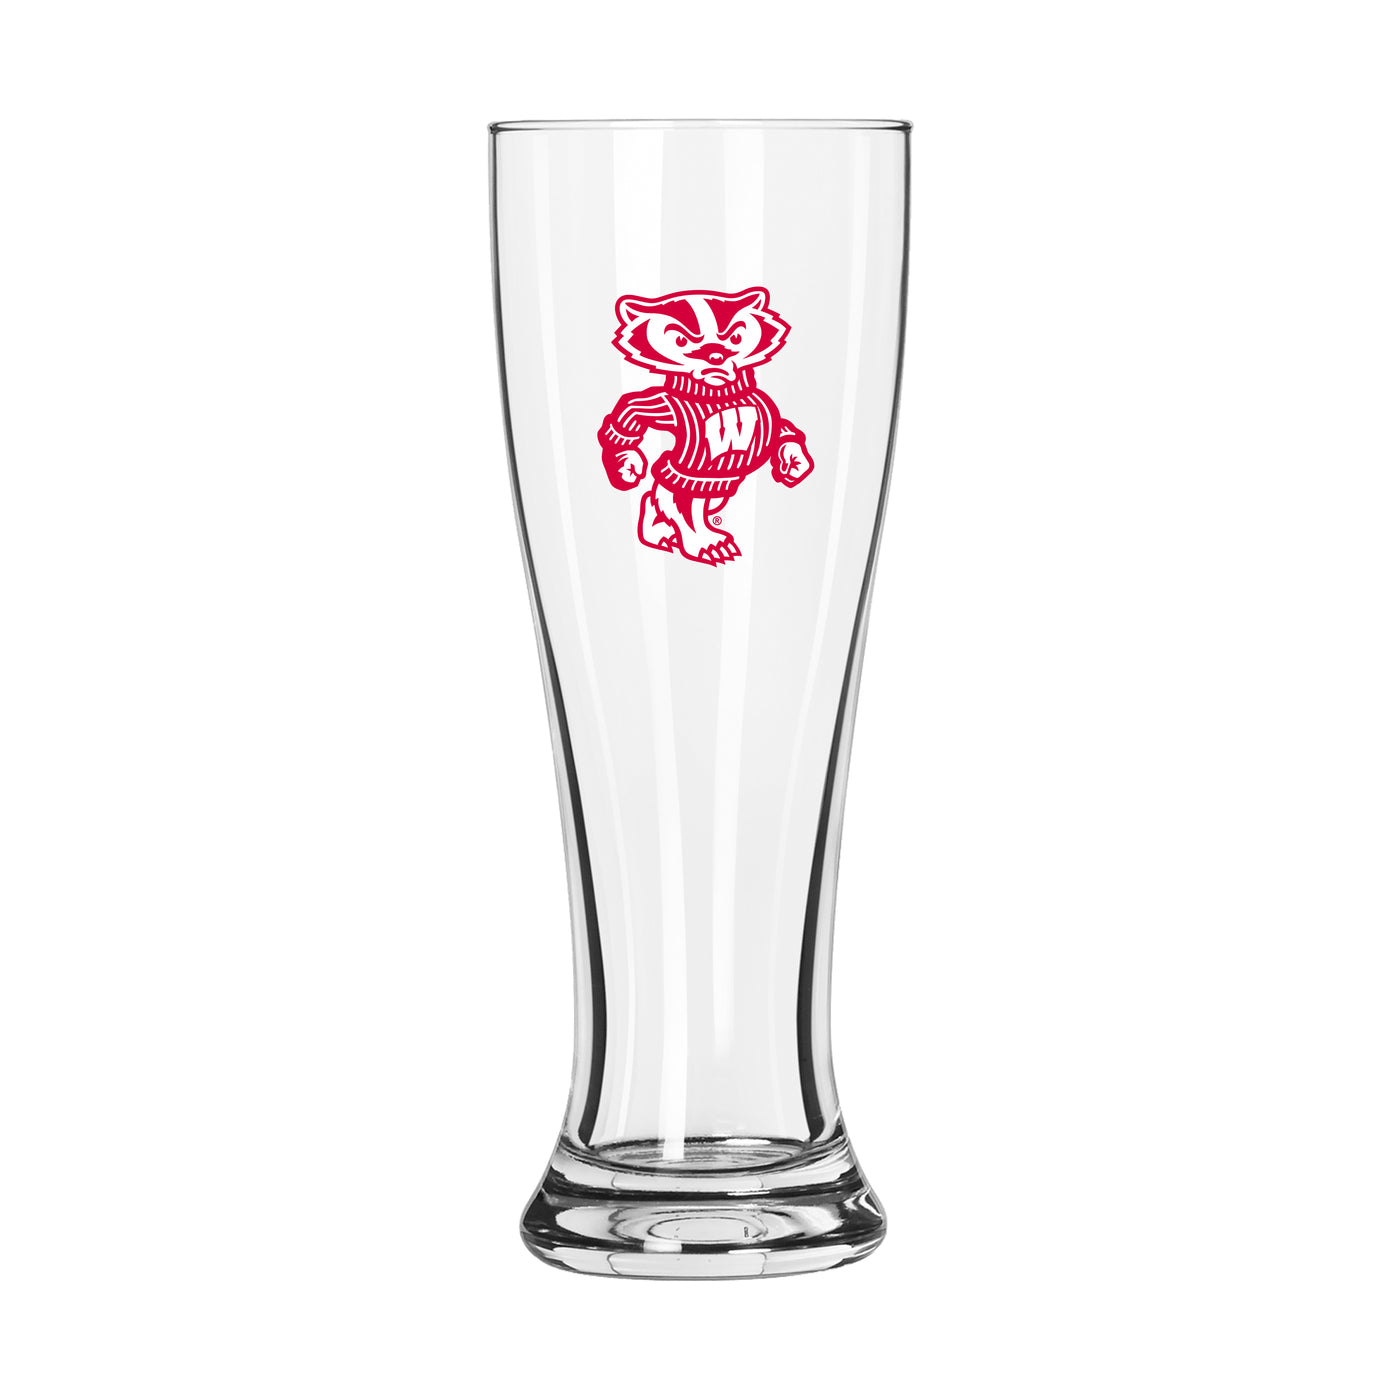 Wisconsin 16oz Clear Pilsner Glass